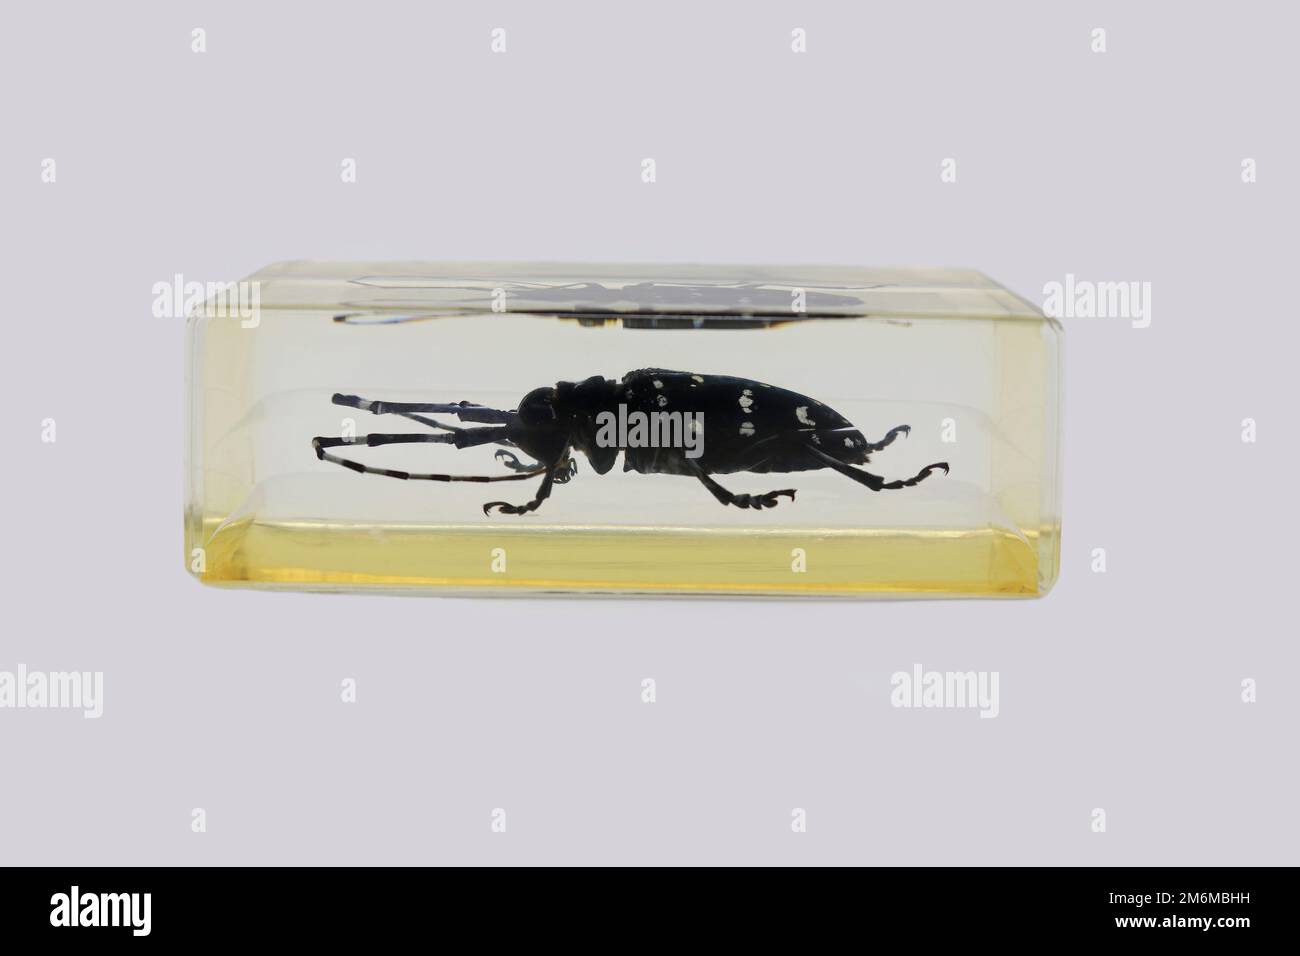 Asian Longhorn Beetle (Anoplophora glabripennis) in lucite Stock Photo